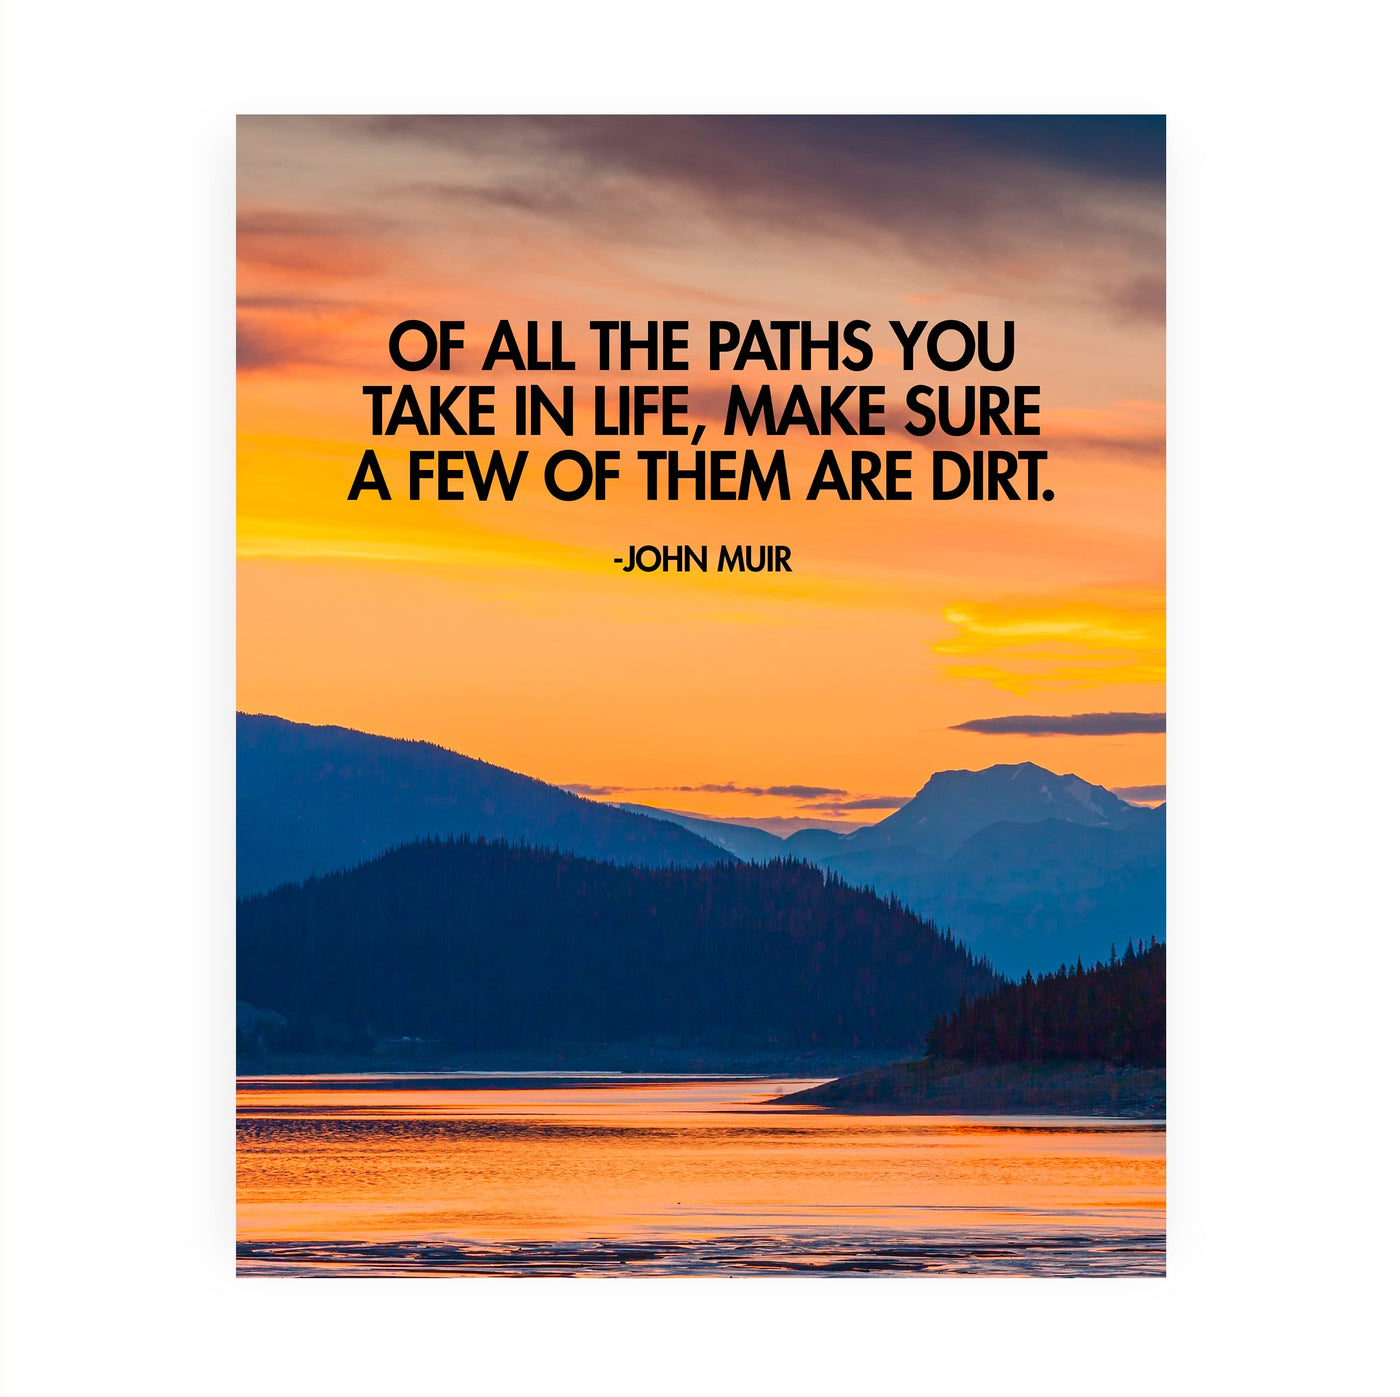 John Muir Quotes-"Make Sure a Few Paths Are Dirt" Motivational Wall Art -8 x 10" Inspirational Mountain Lake Sunset Print -Ready to Frame. Home-Office-Cabin-Lodge Decor. Great Gift for Inspiration!